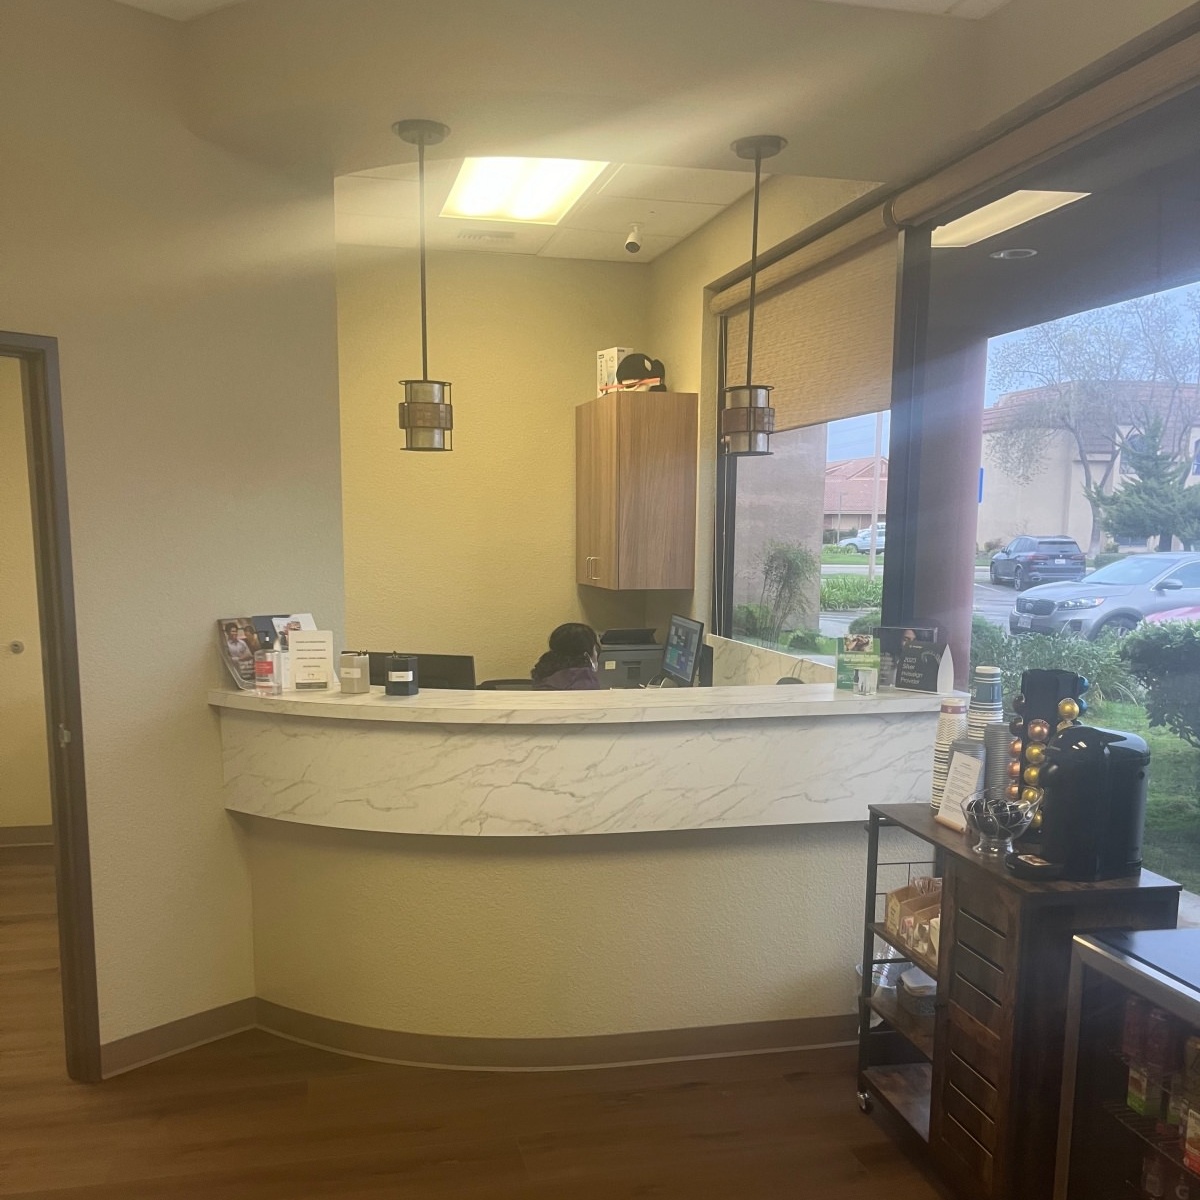 Dental office front desk completed by Dry Creek Construction